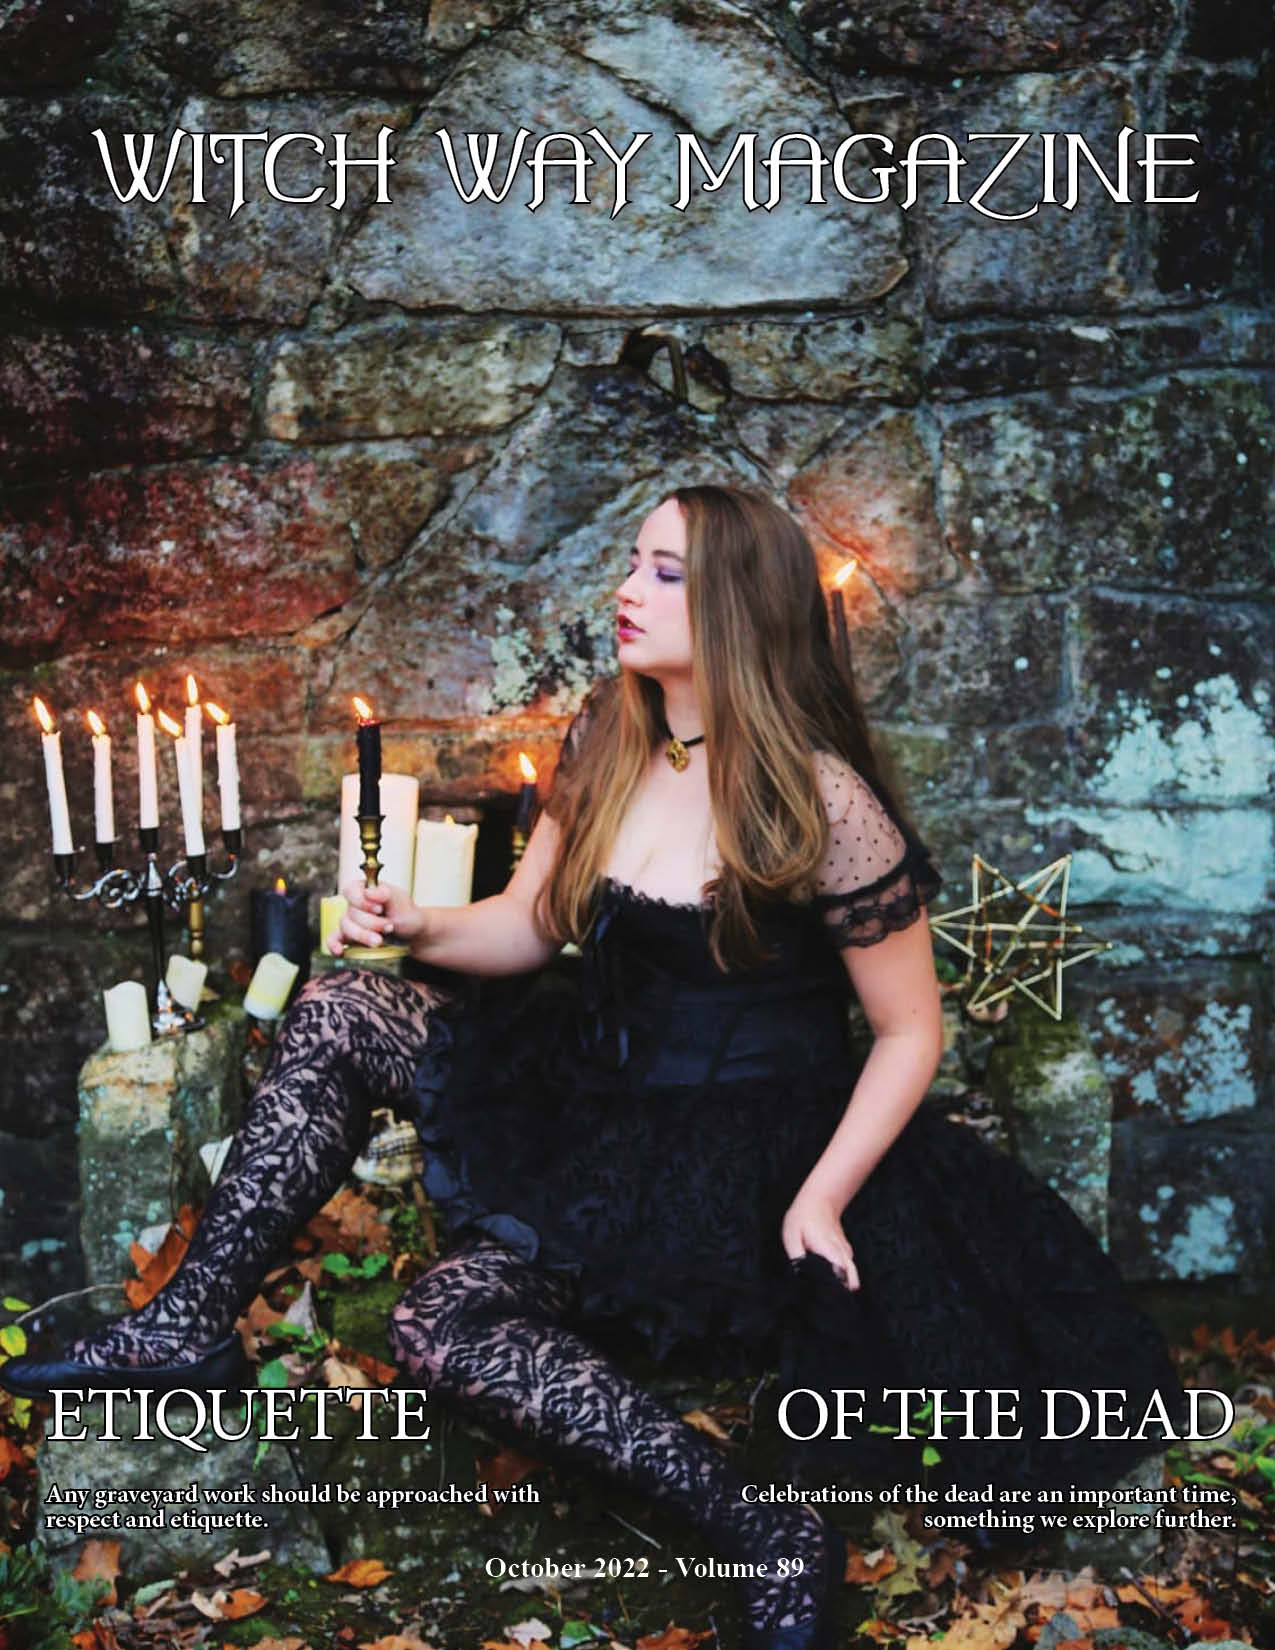 October 2022 Vol #89 - Witch Way Magazine - Issue - Digital Issue